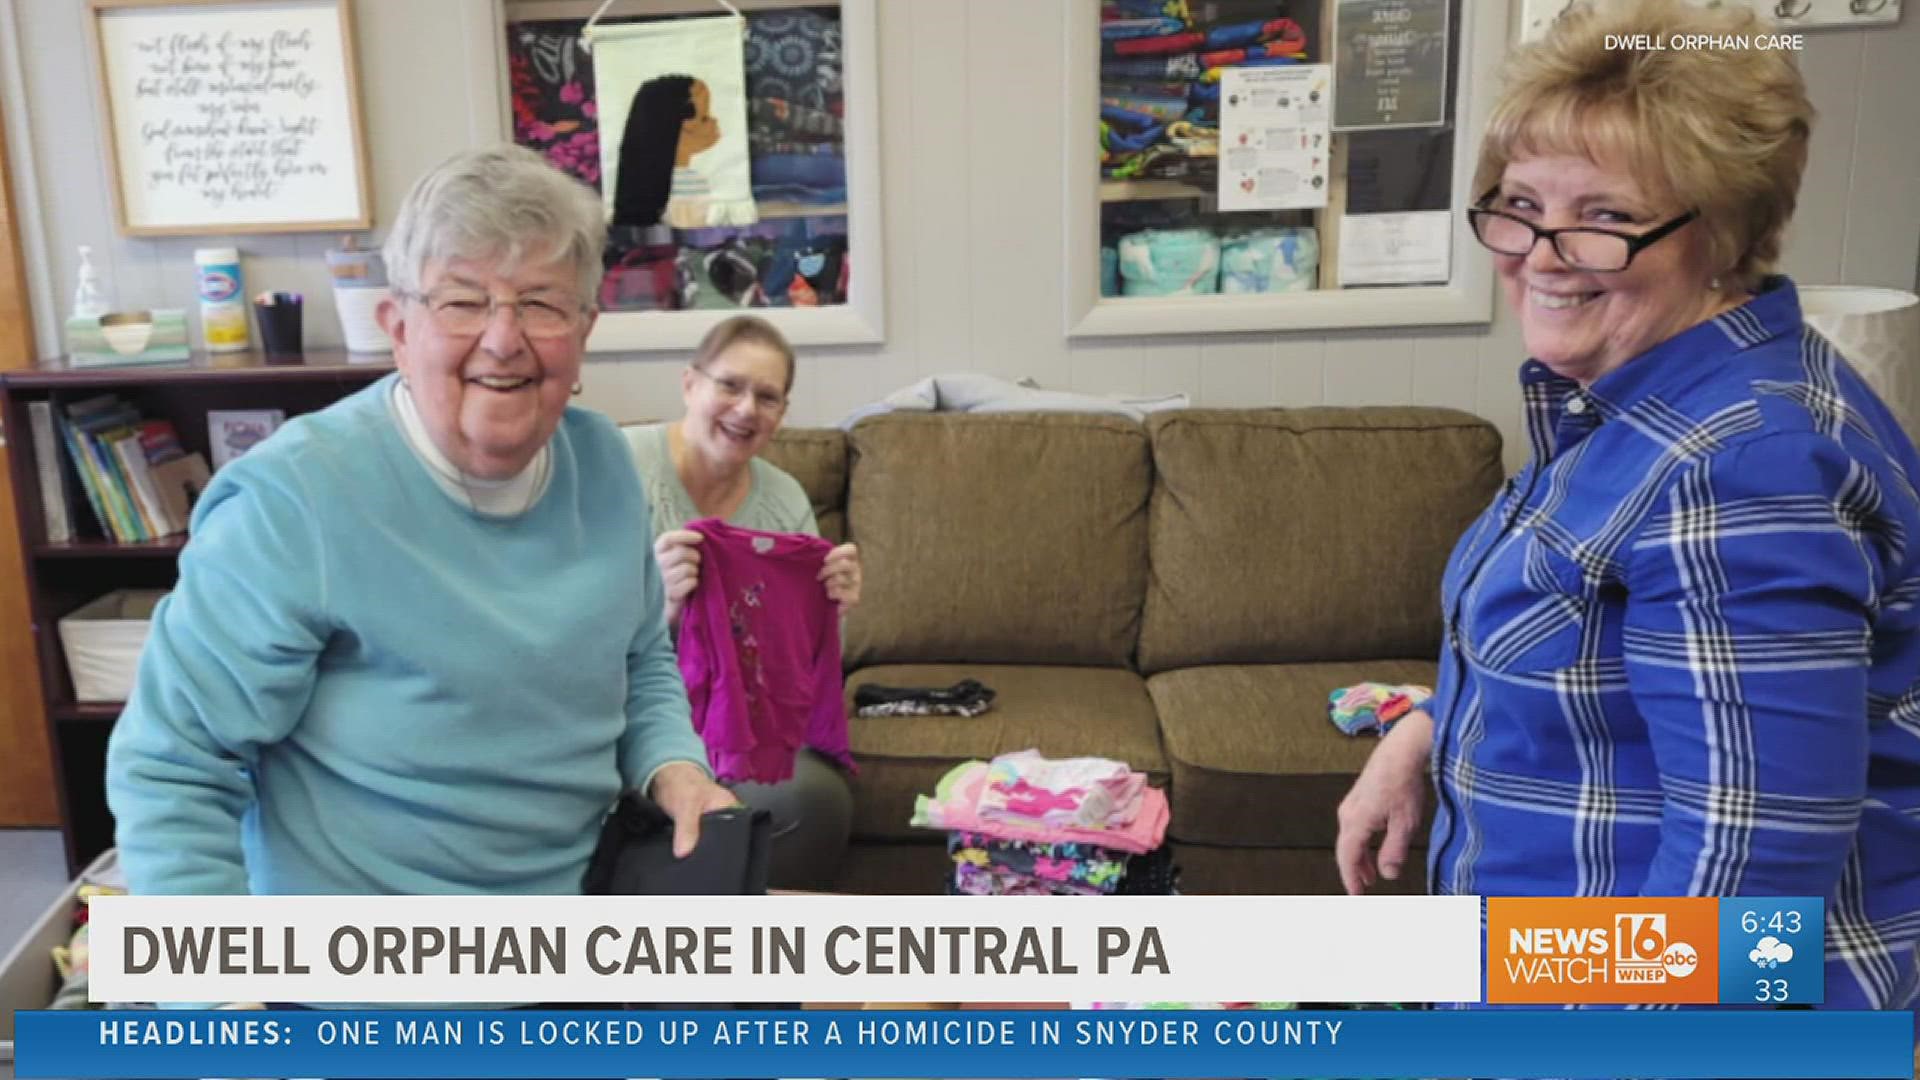 Another group that’s looking for more hands to help area kids is Dwell Orphan Care in central Pennsylvania.